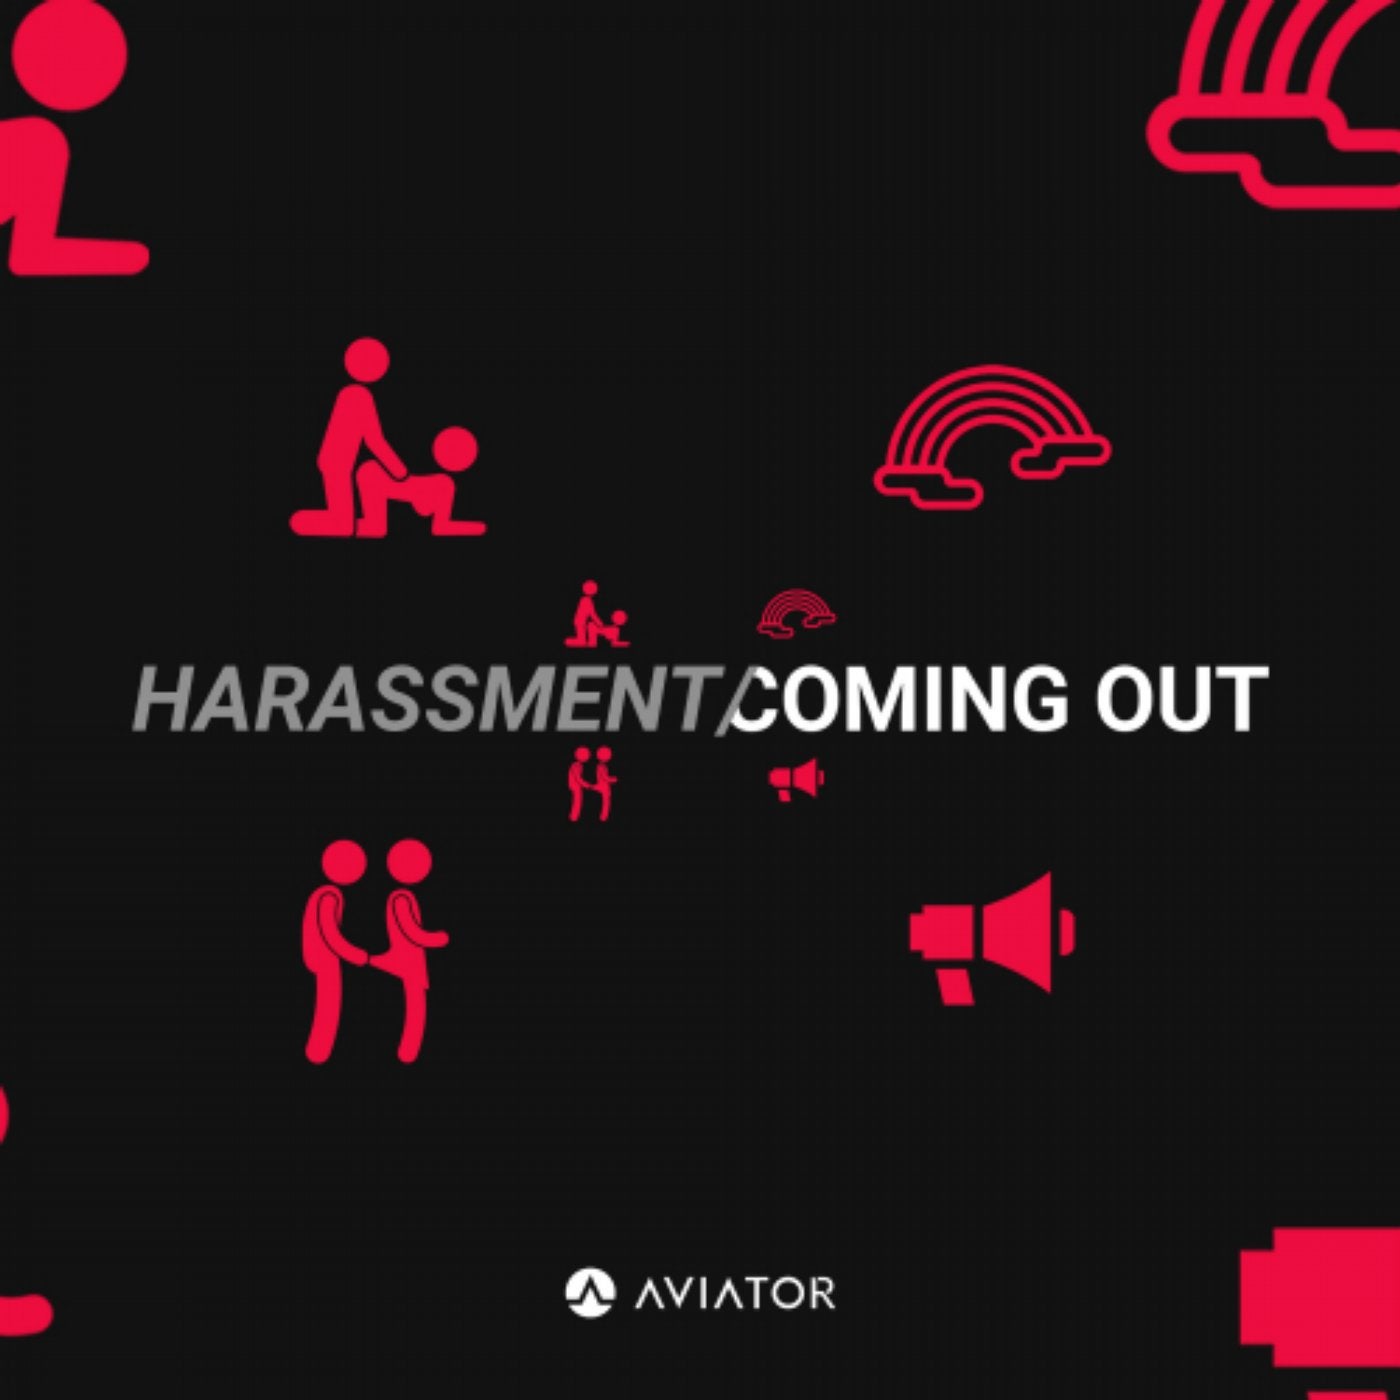 Harassment / Coming Out